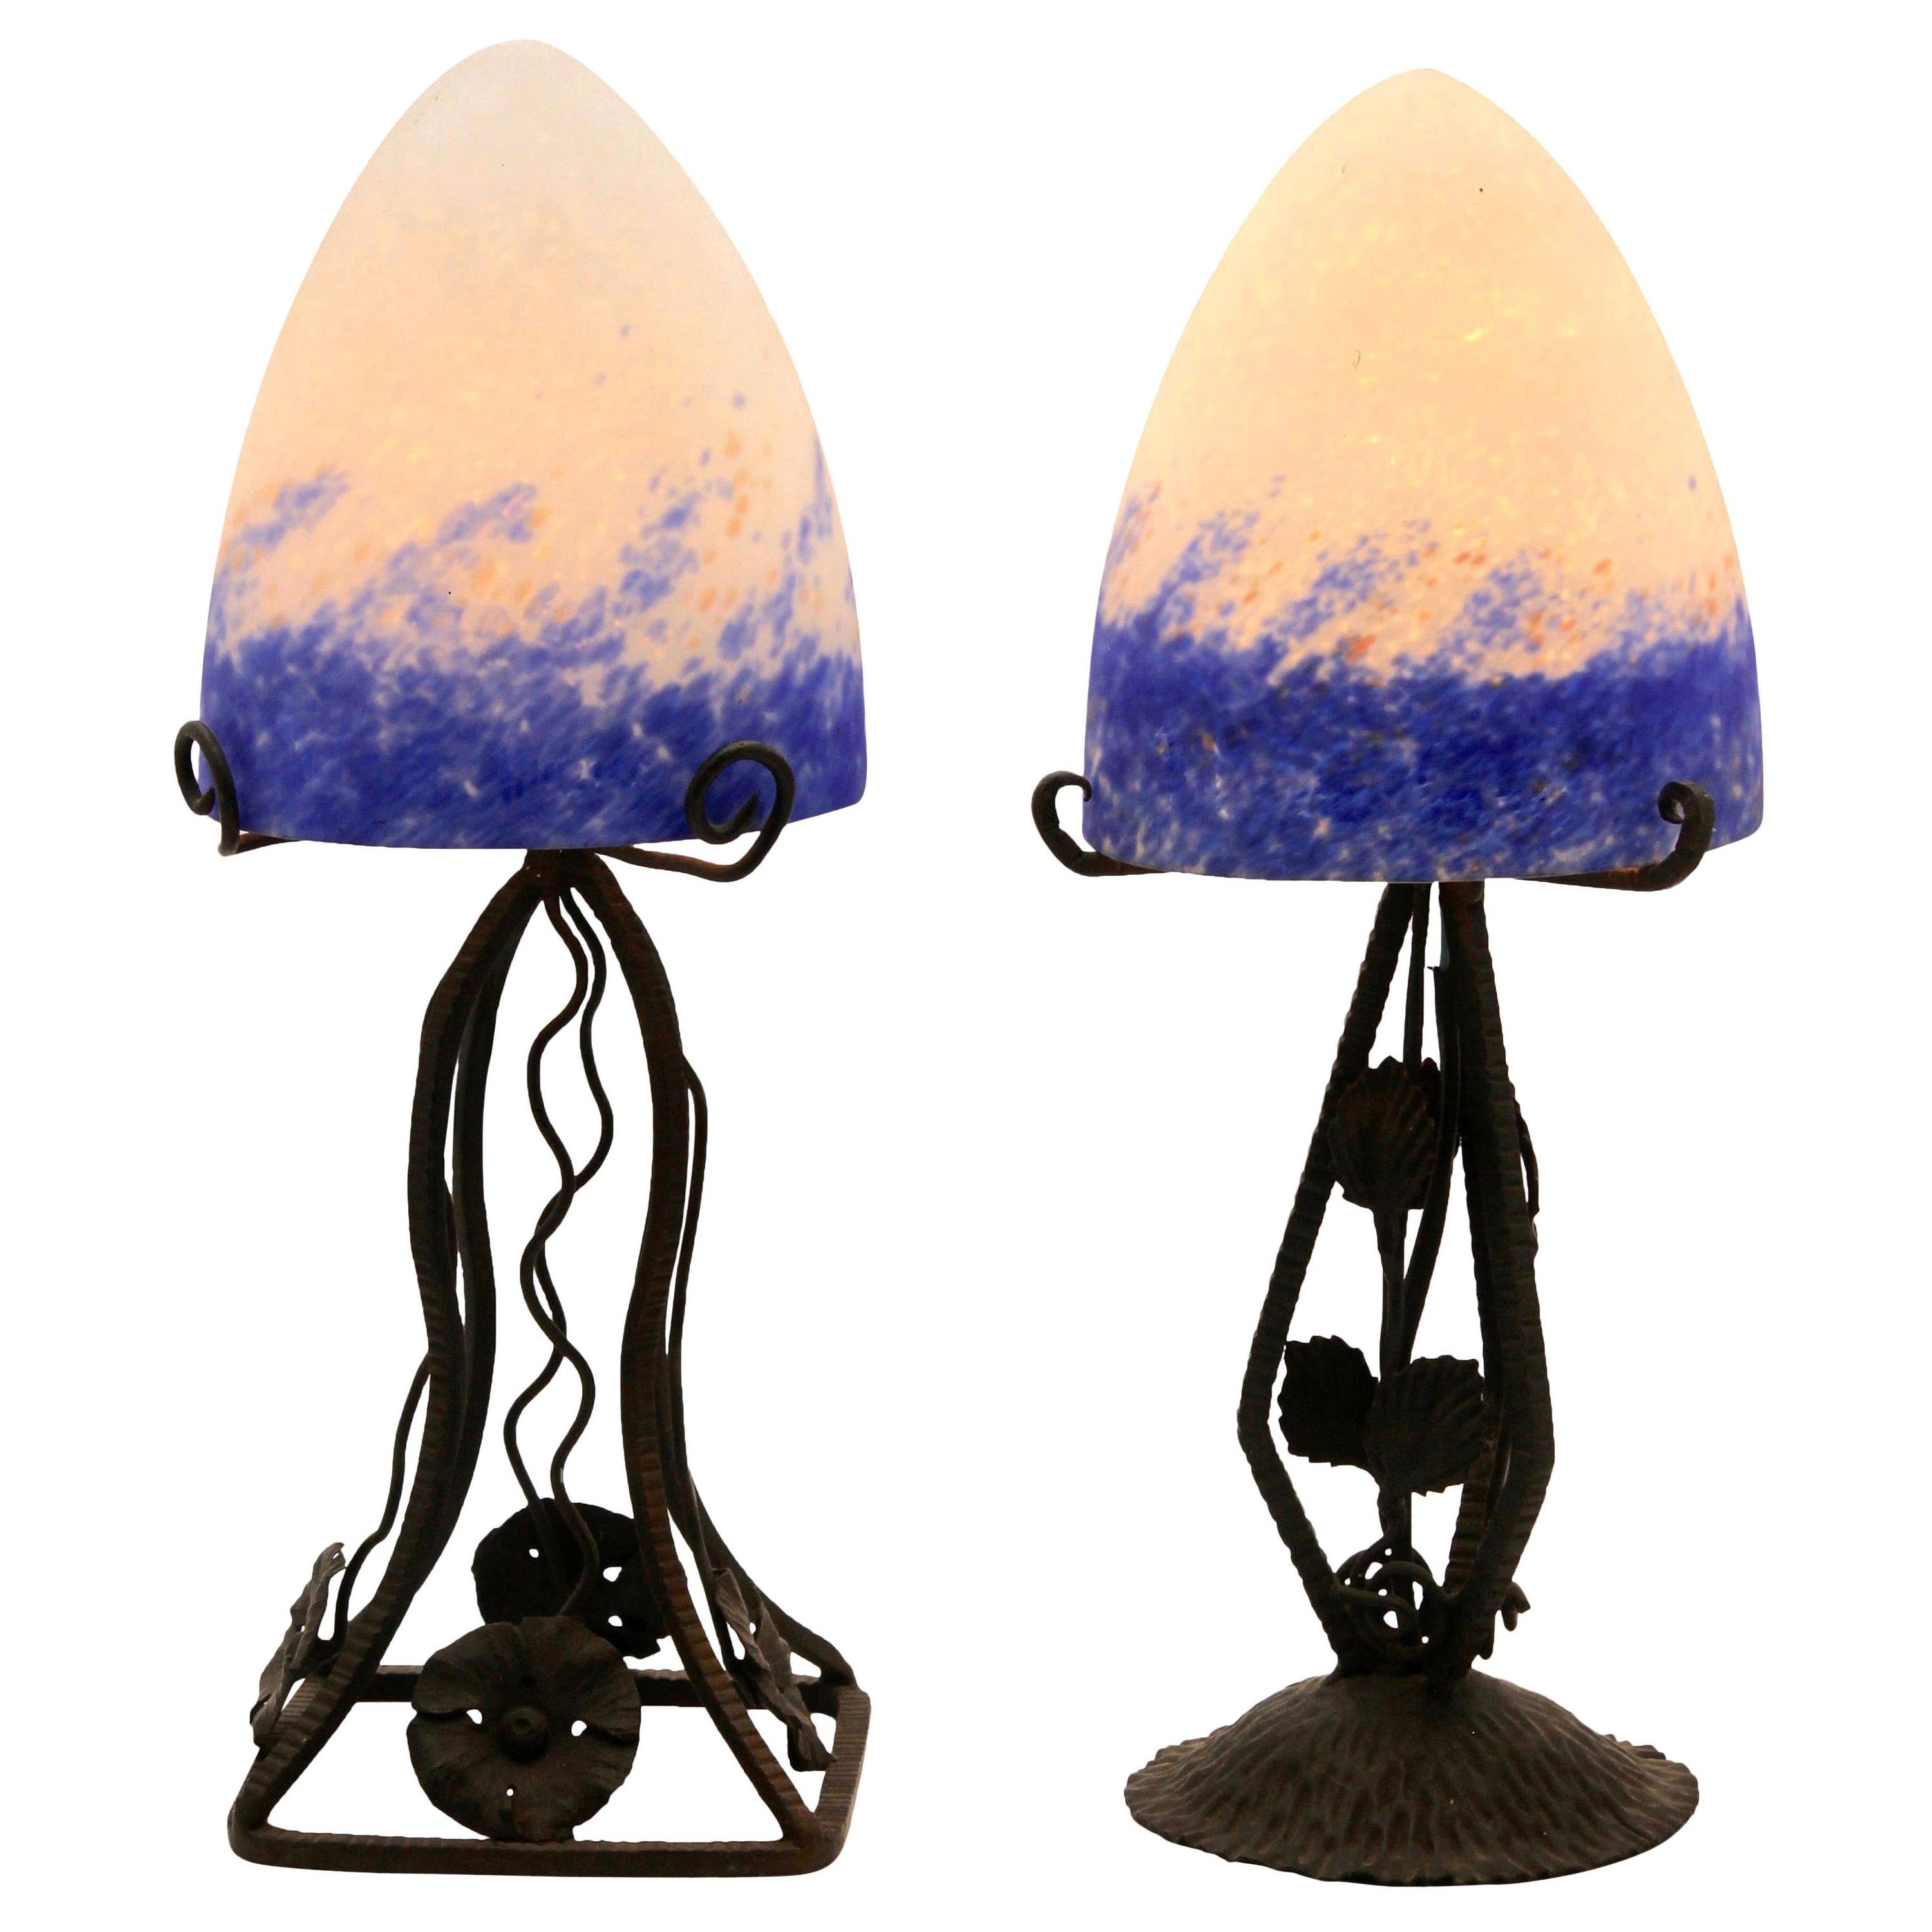 Pair of French Art Deco Lamps in Wrought Iron with Colored Glass Shades Signed